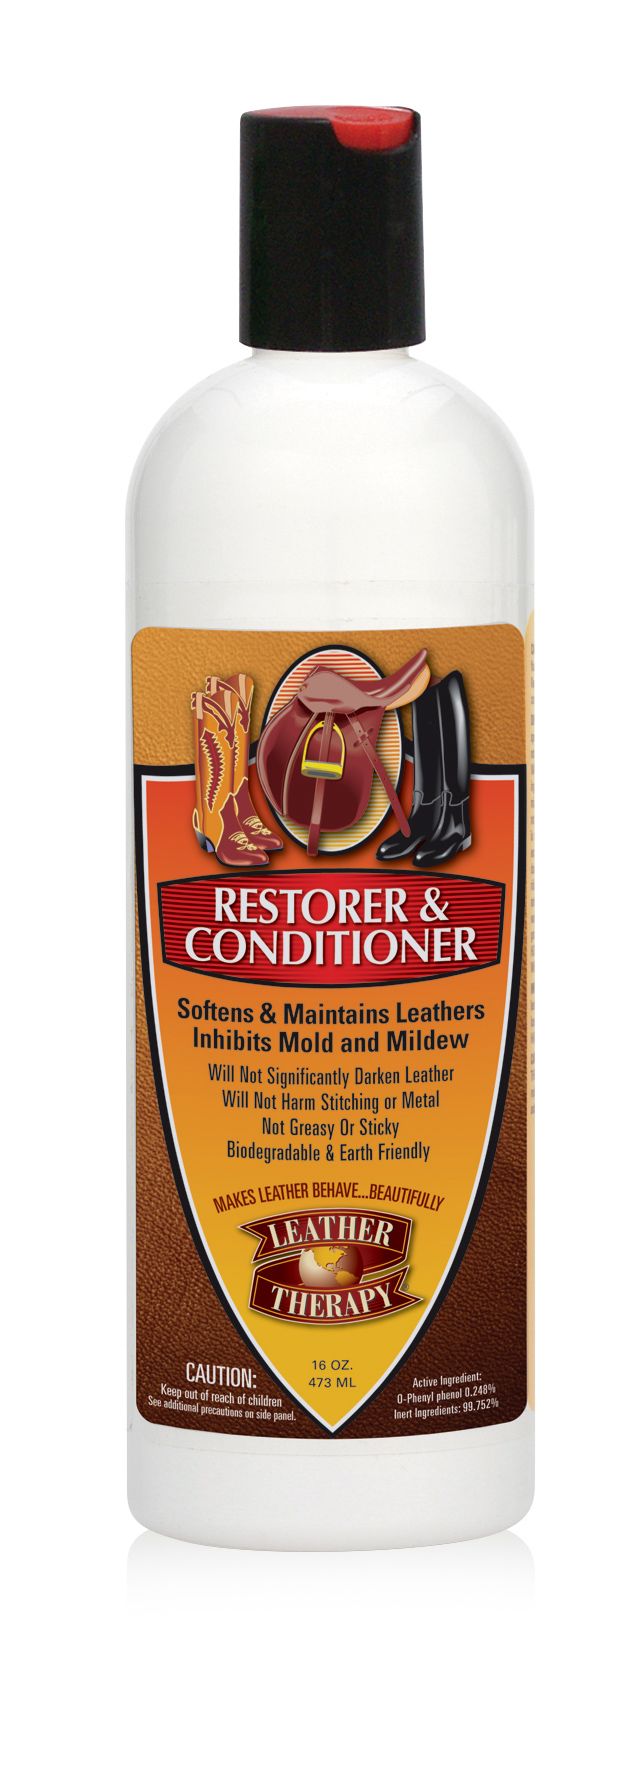 Absorbine Leather Therapy